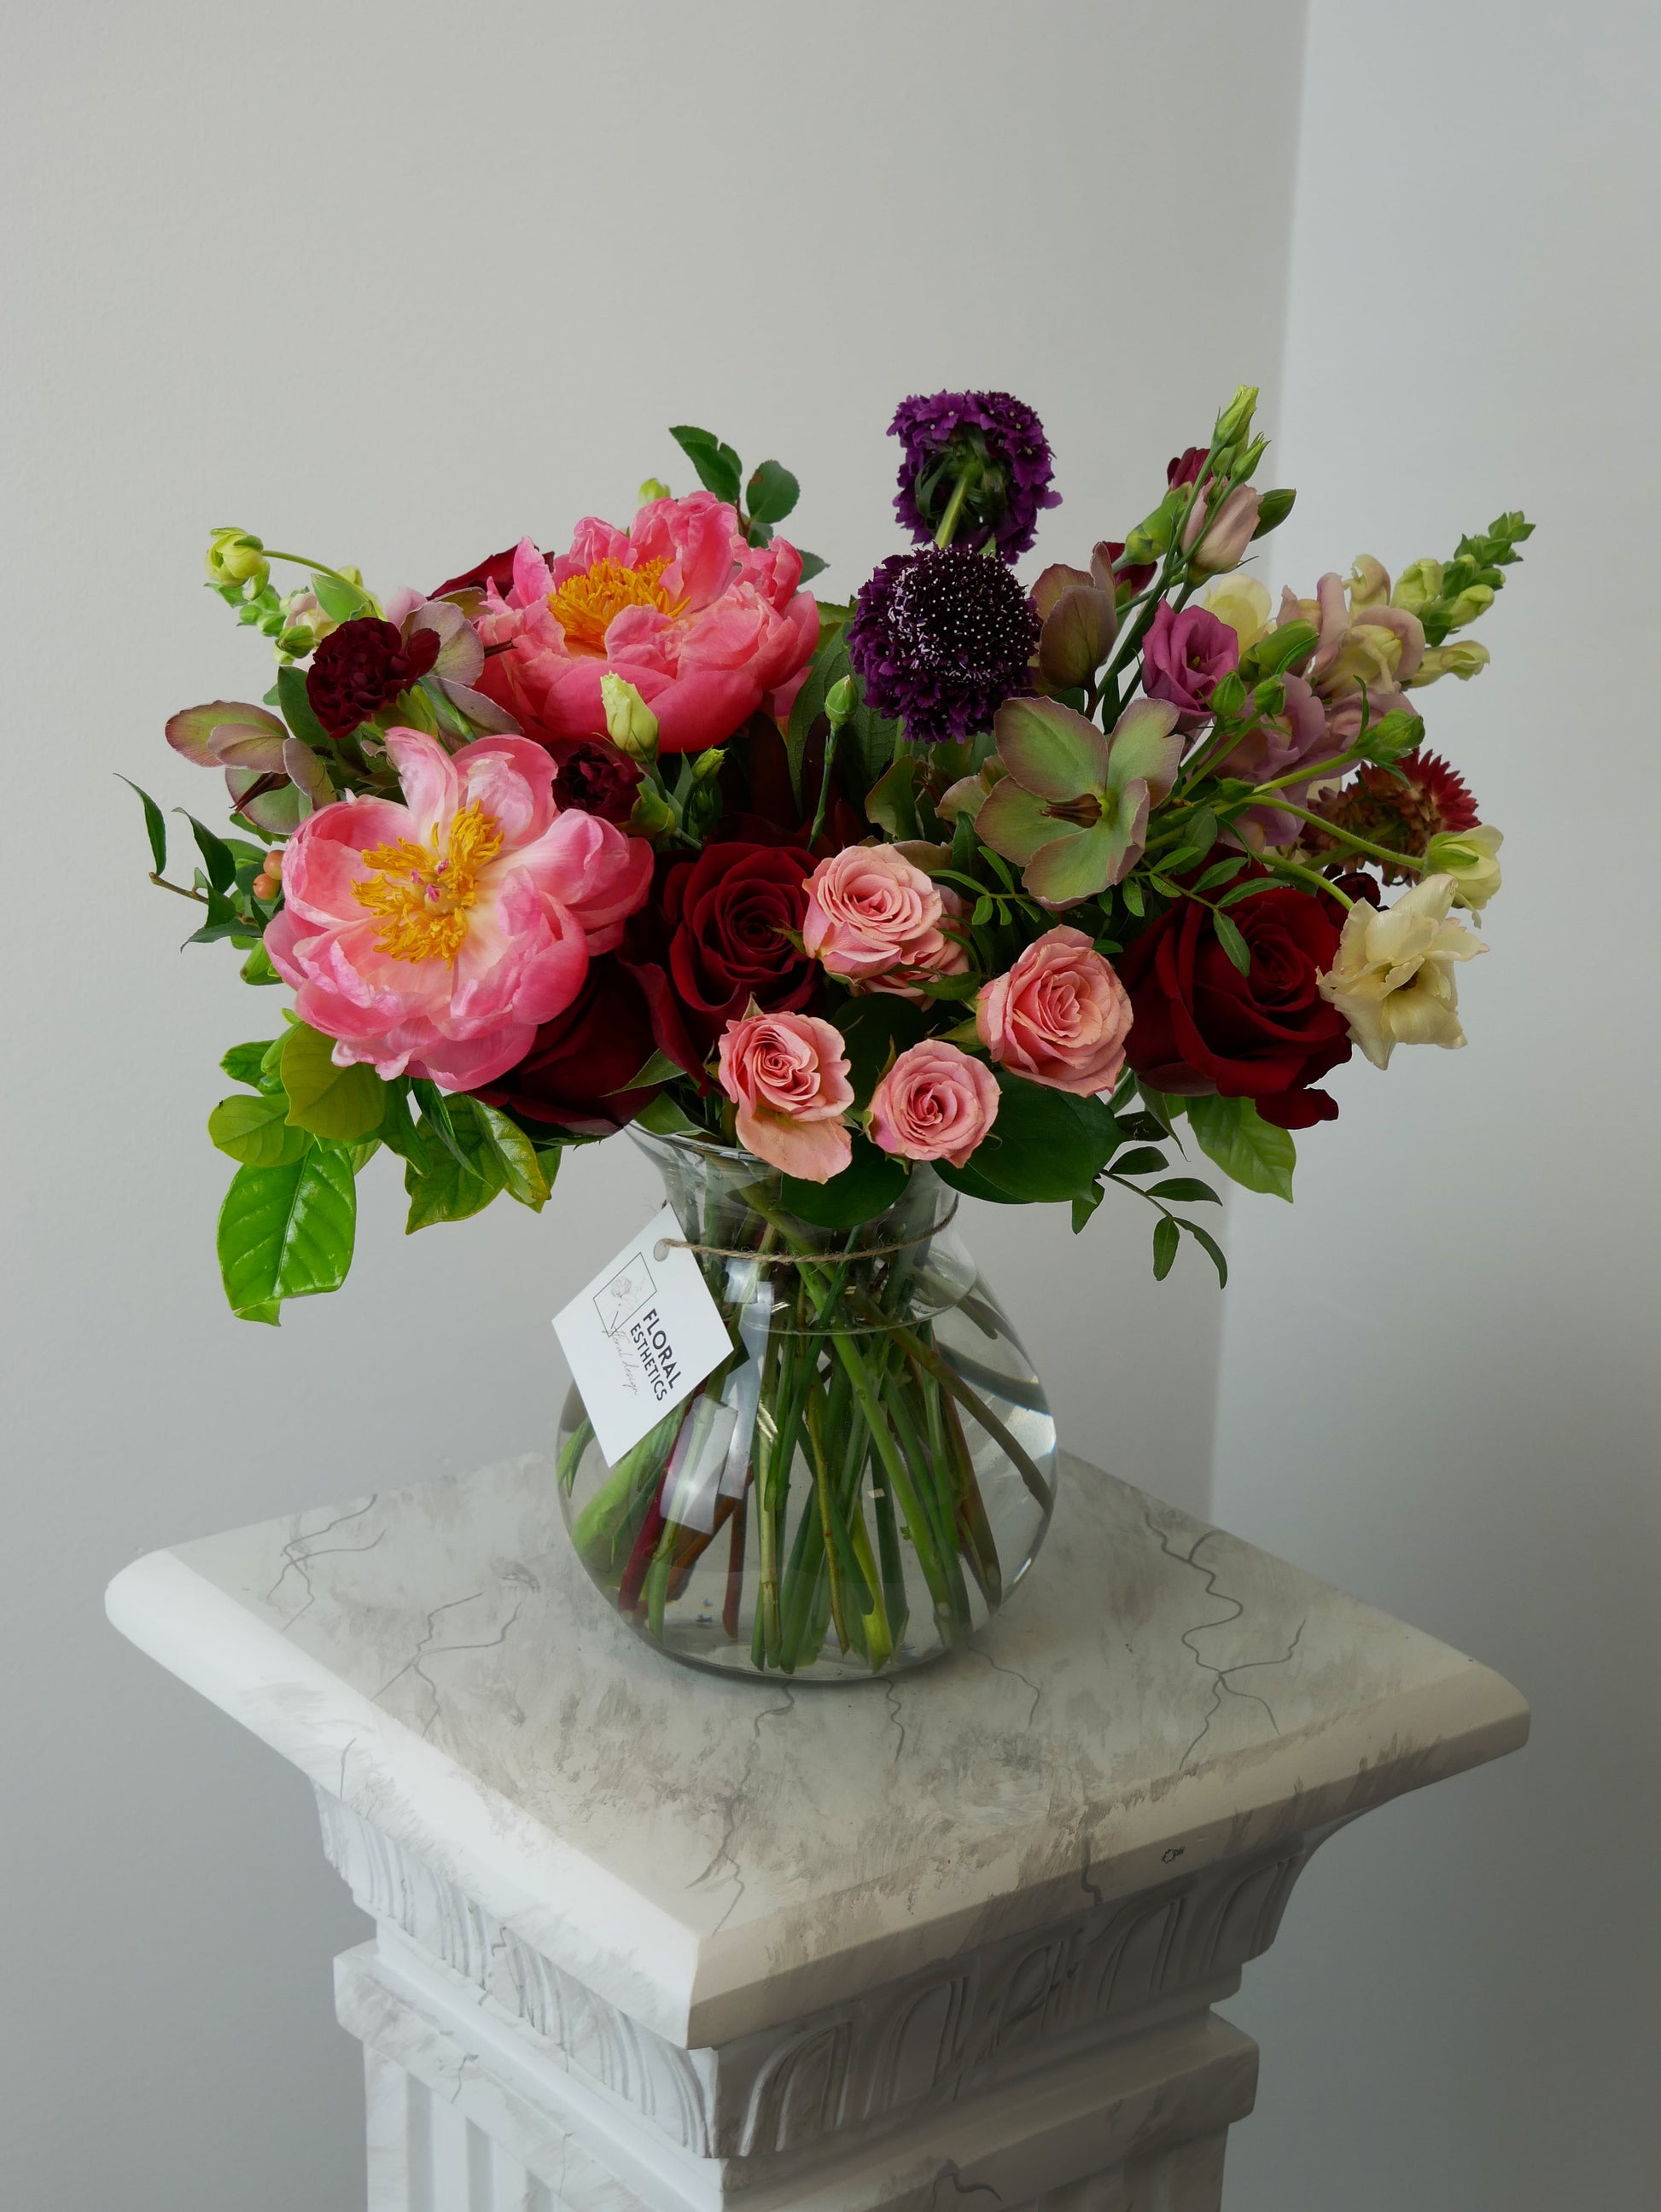 Premium burgundy red and pink flower arrangement in vase featuring peonies, roses, hellebore and rich foliage